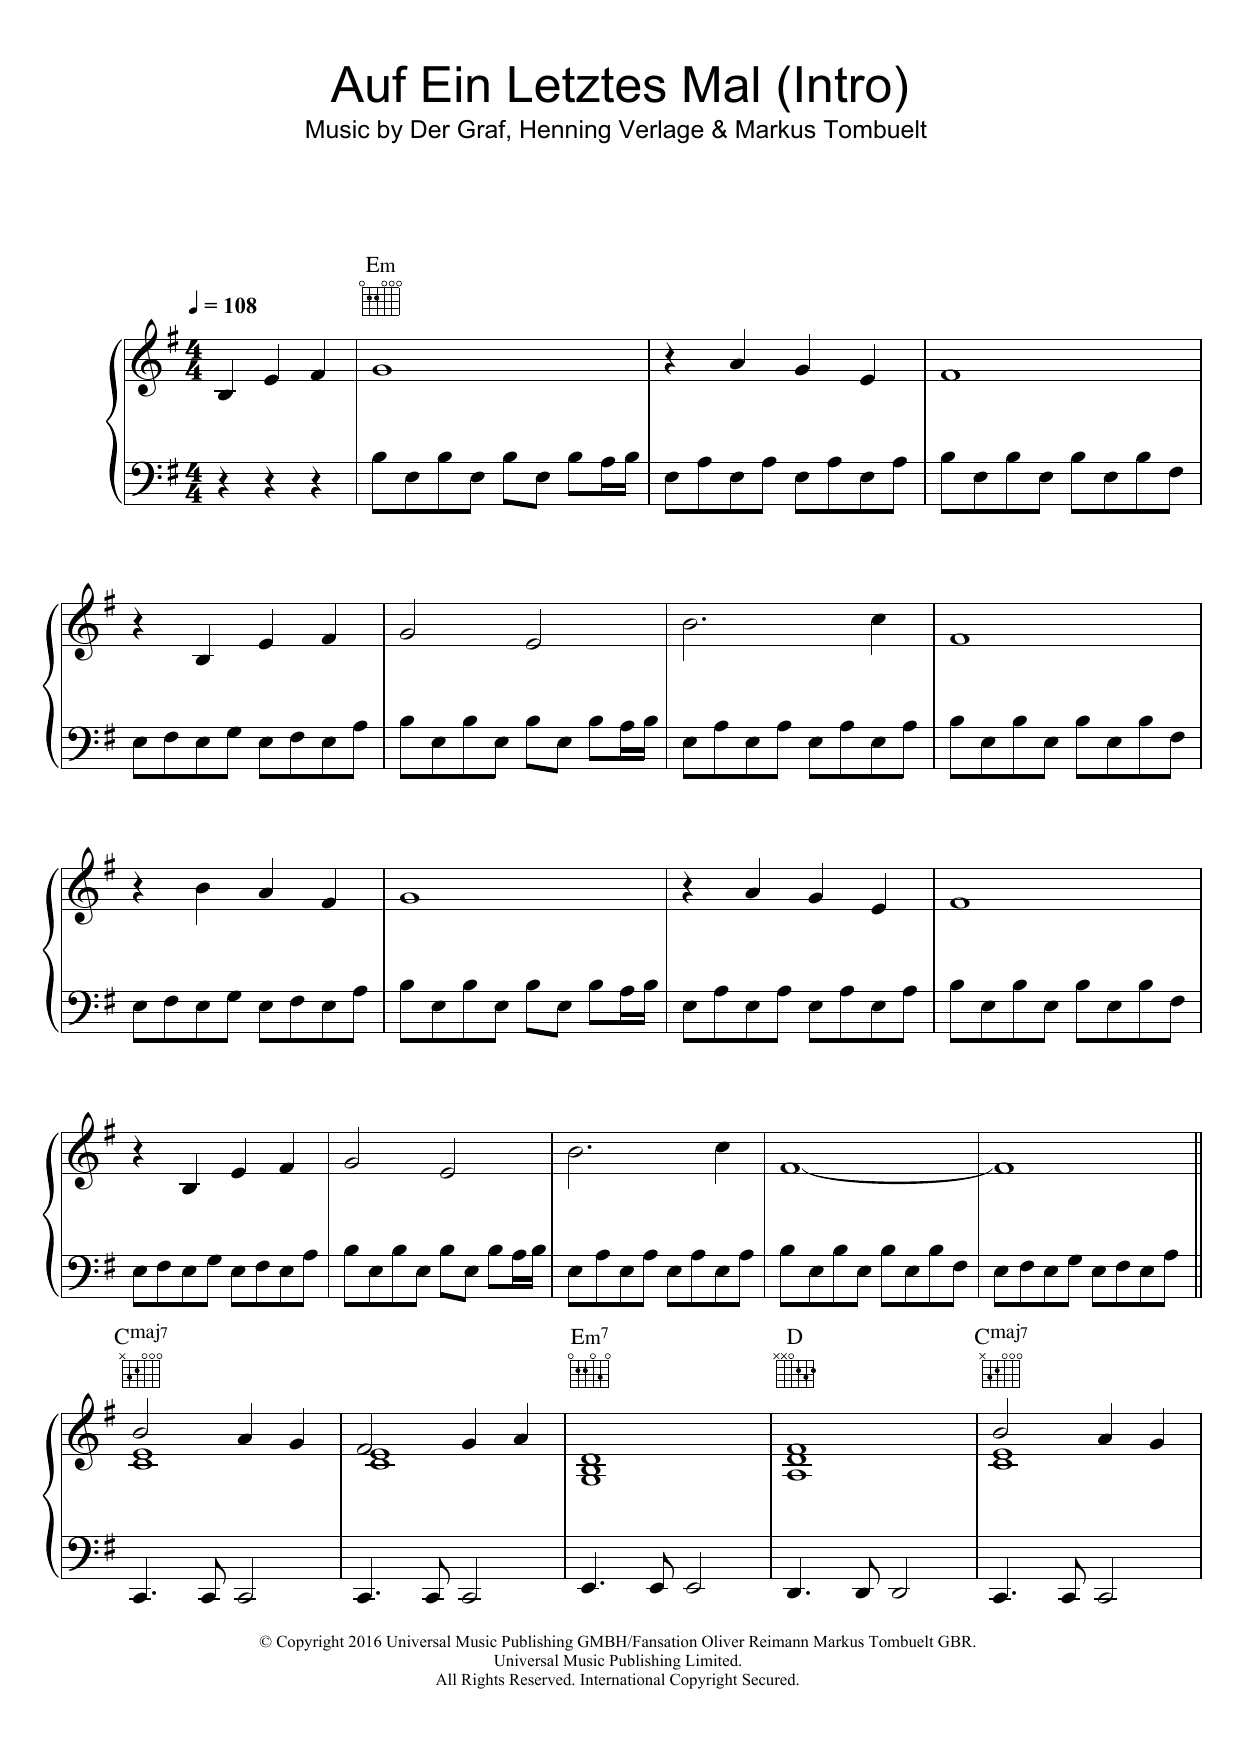 Unheilig Auf Ein Letztes Mal (Intro) sheet music notes and chords. Download Printable PDF.